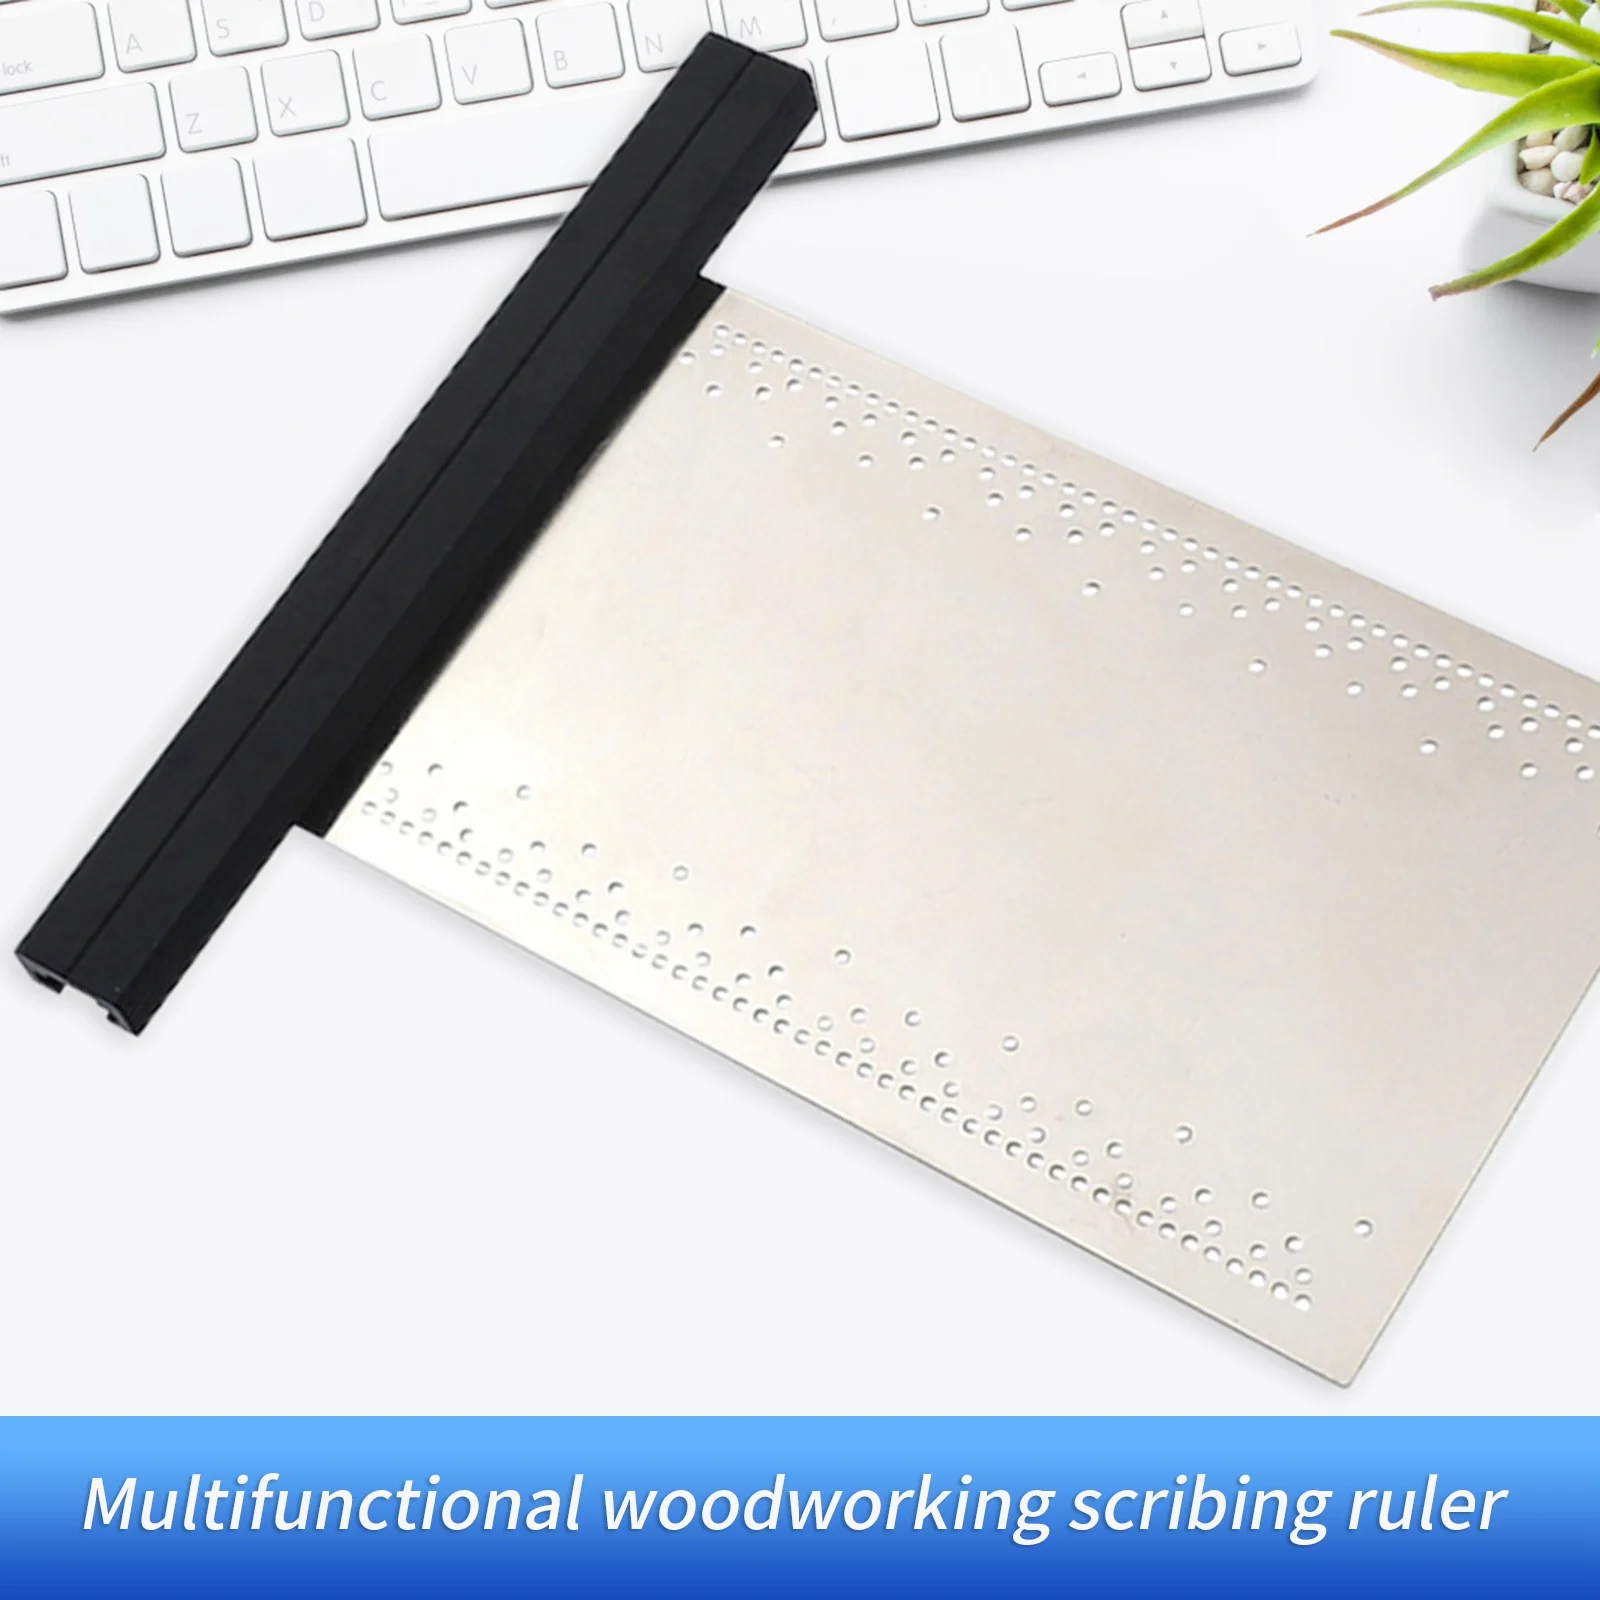 High-precision Scale Ruler Woodworking Scribe Hole Laser Scribing Ruler Crossed-out Line Drawing Marking Gauge Measuring Tool 300mm 500mm woodworking scribe woodworking multifunction scribing ruler t type ruler drawing marking gauge diy measuring tools